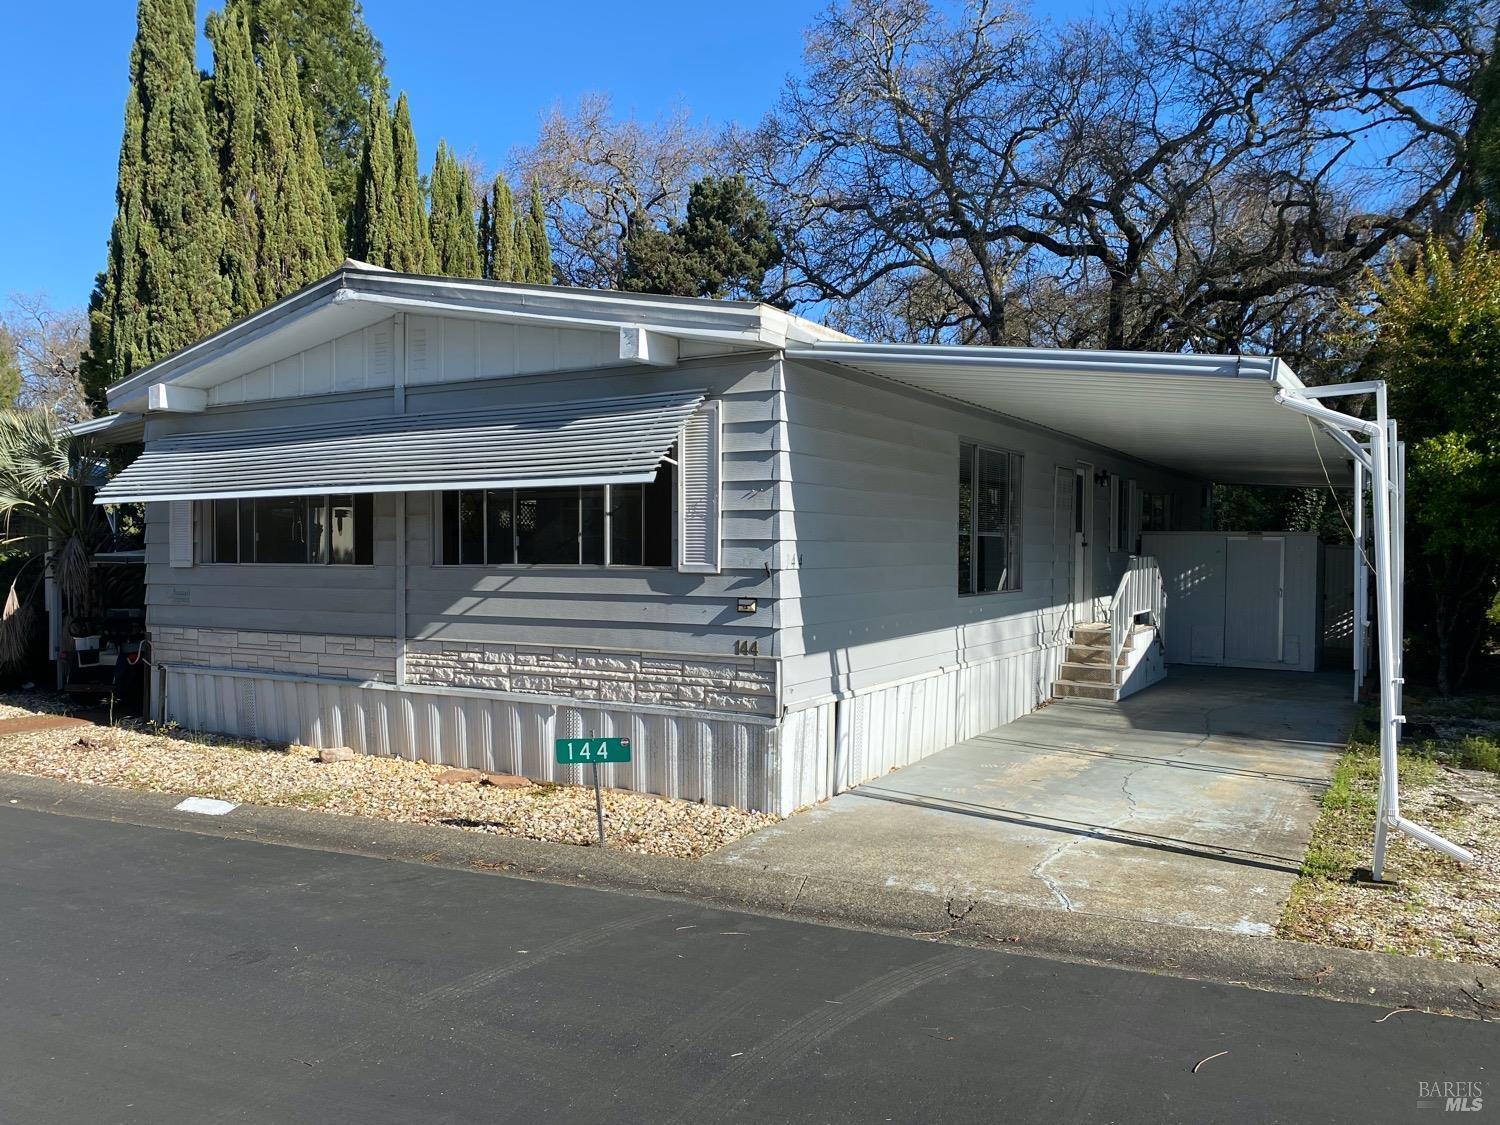 Photo of 2412 Foothill Blvd #144 in Calistoga, CA